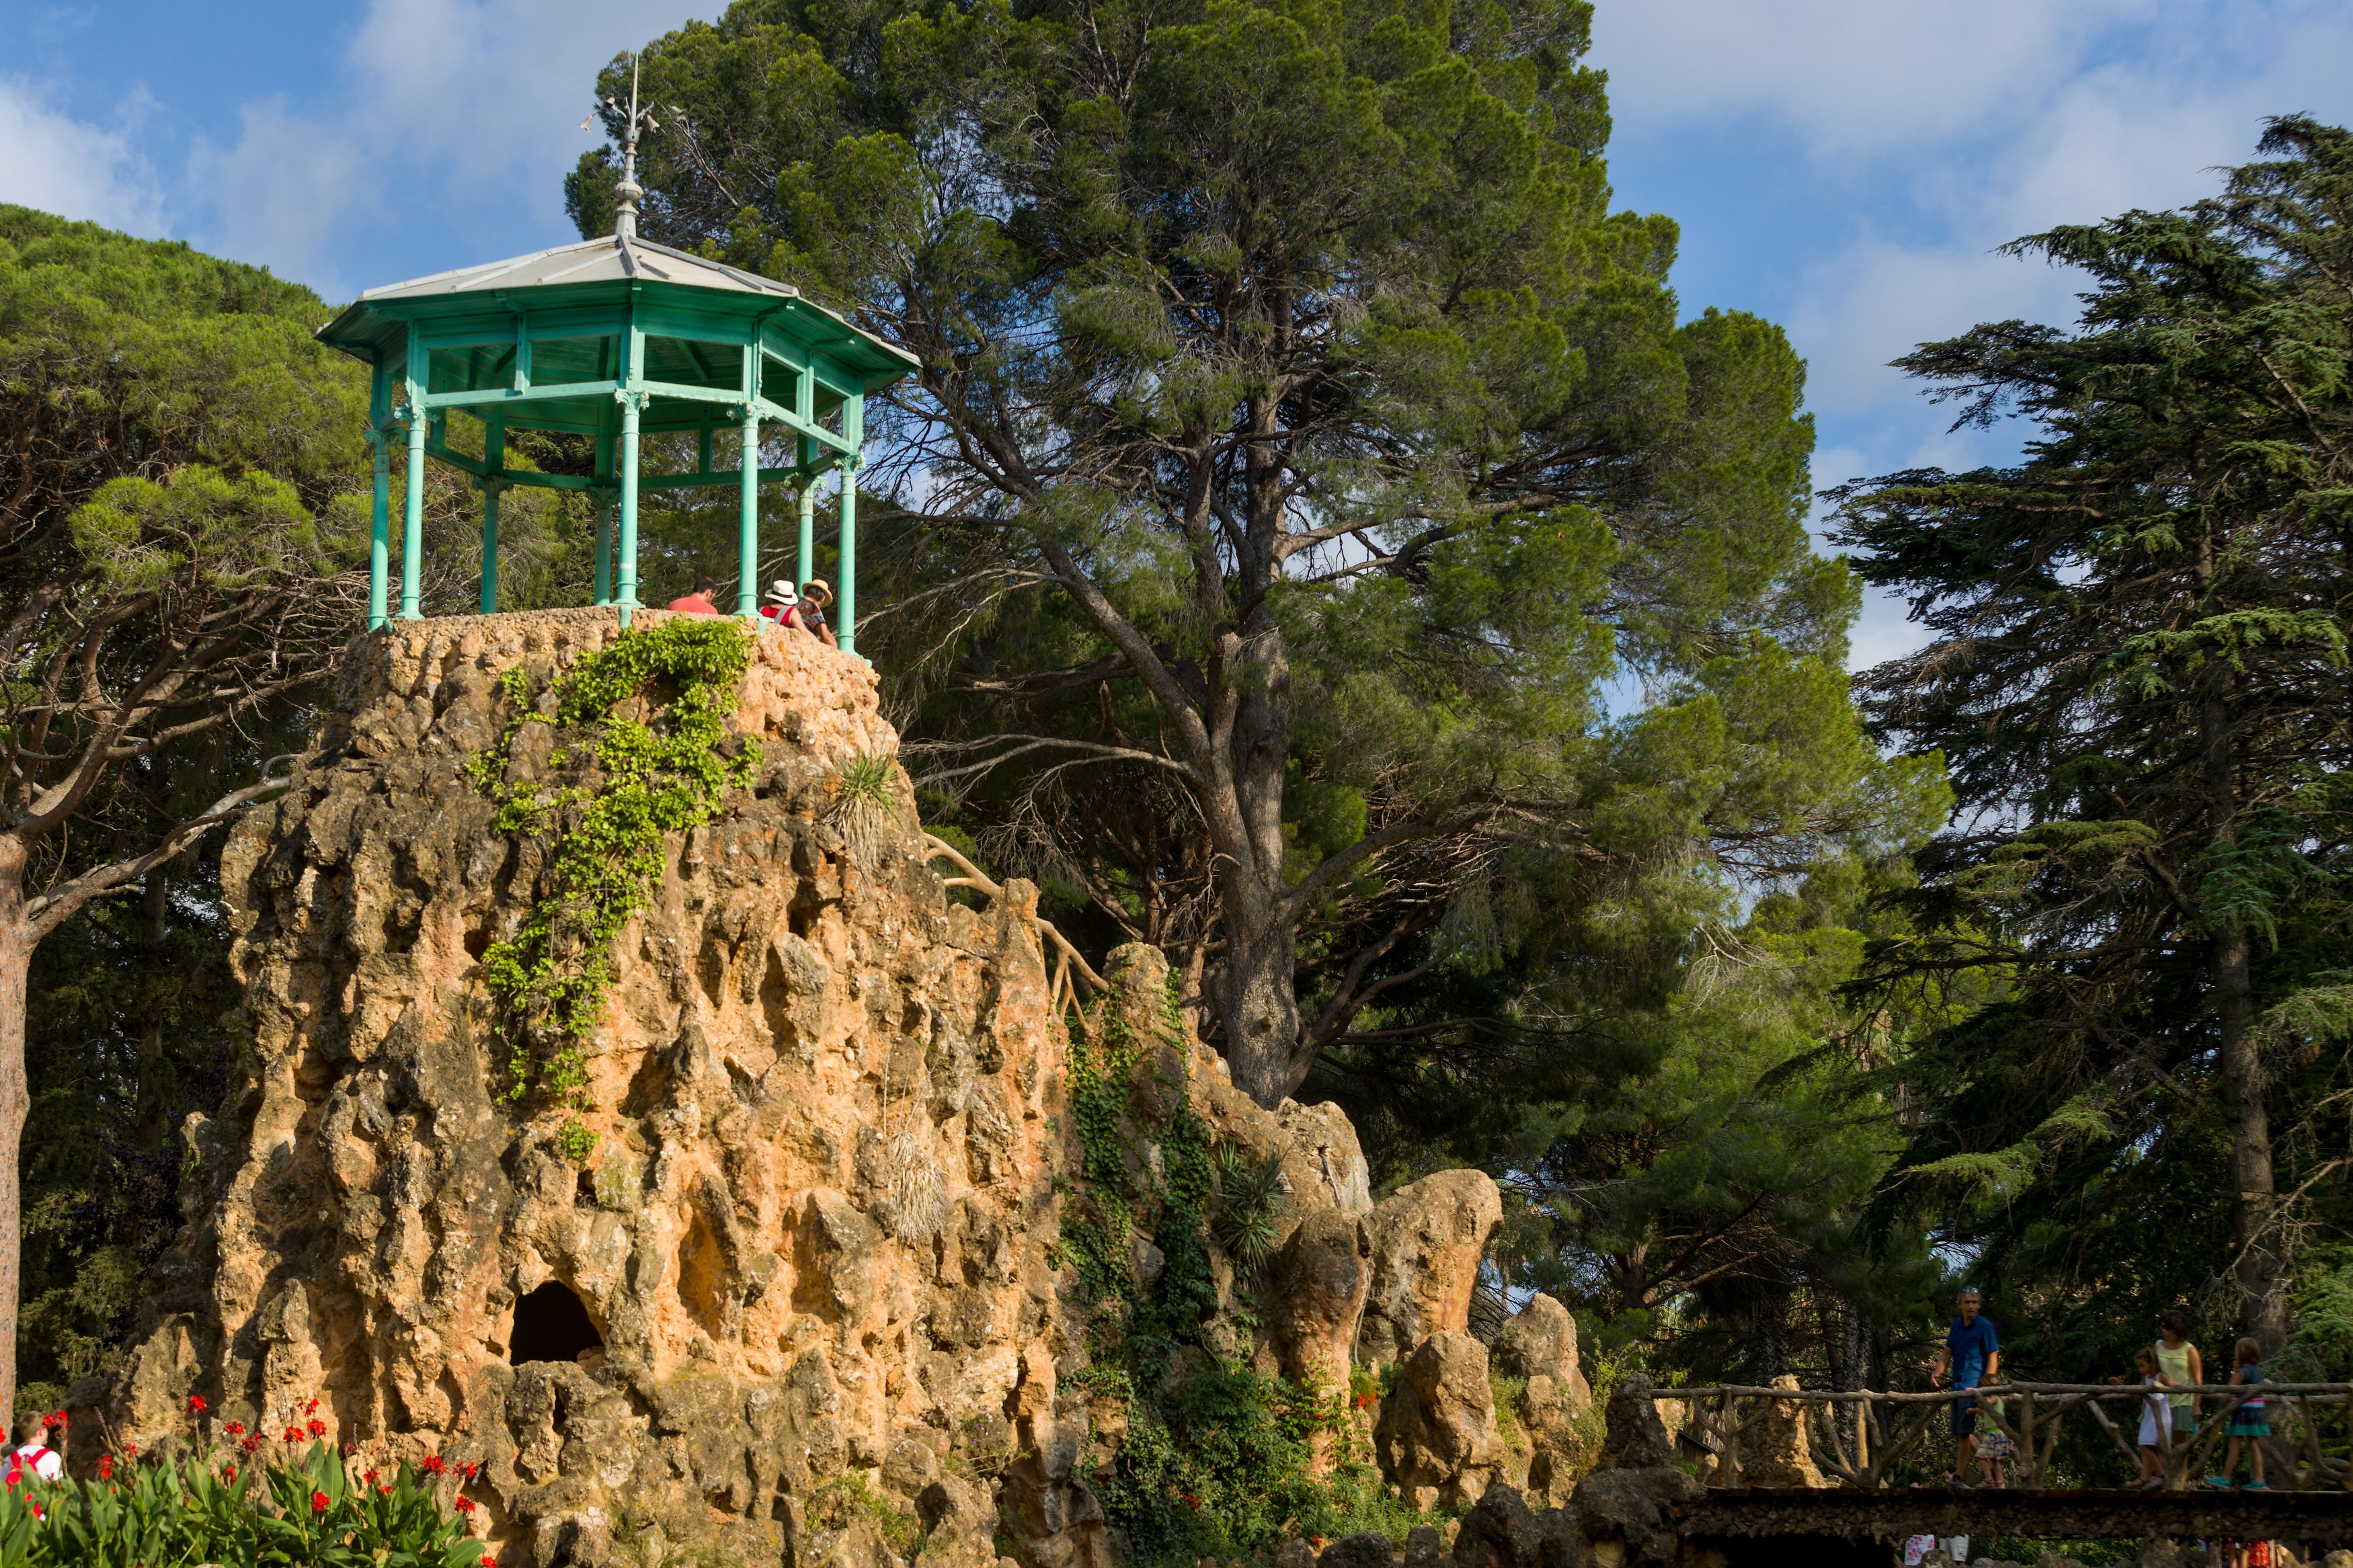 An afternoon’s wander around Parc Sama Botanical Gardens in Cambrils makes for a beautifully calming escape